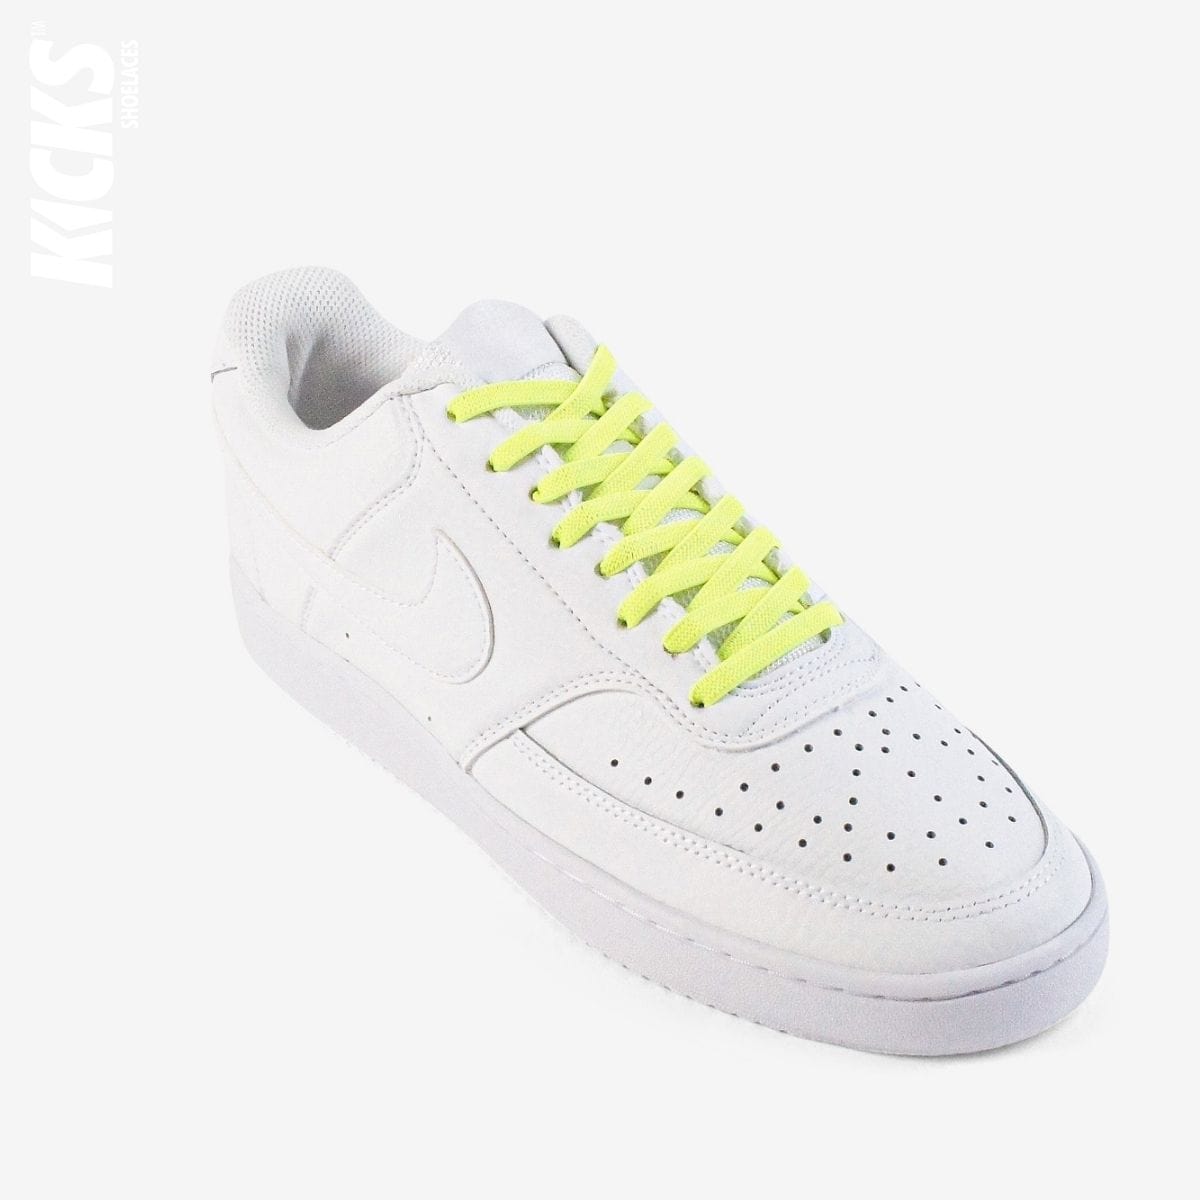 no-tie-shoelaces-with-fluorescent-green-laces-on-nike-white-sneakers-by-kicks-shoelaces